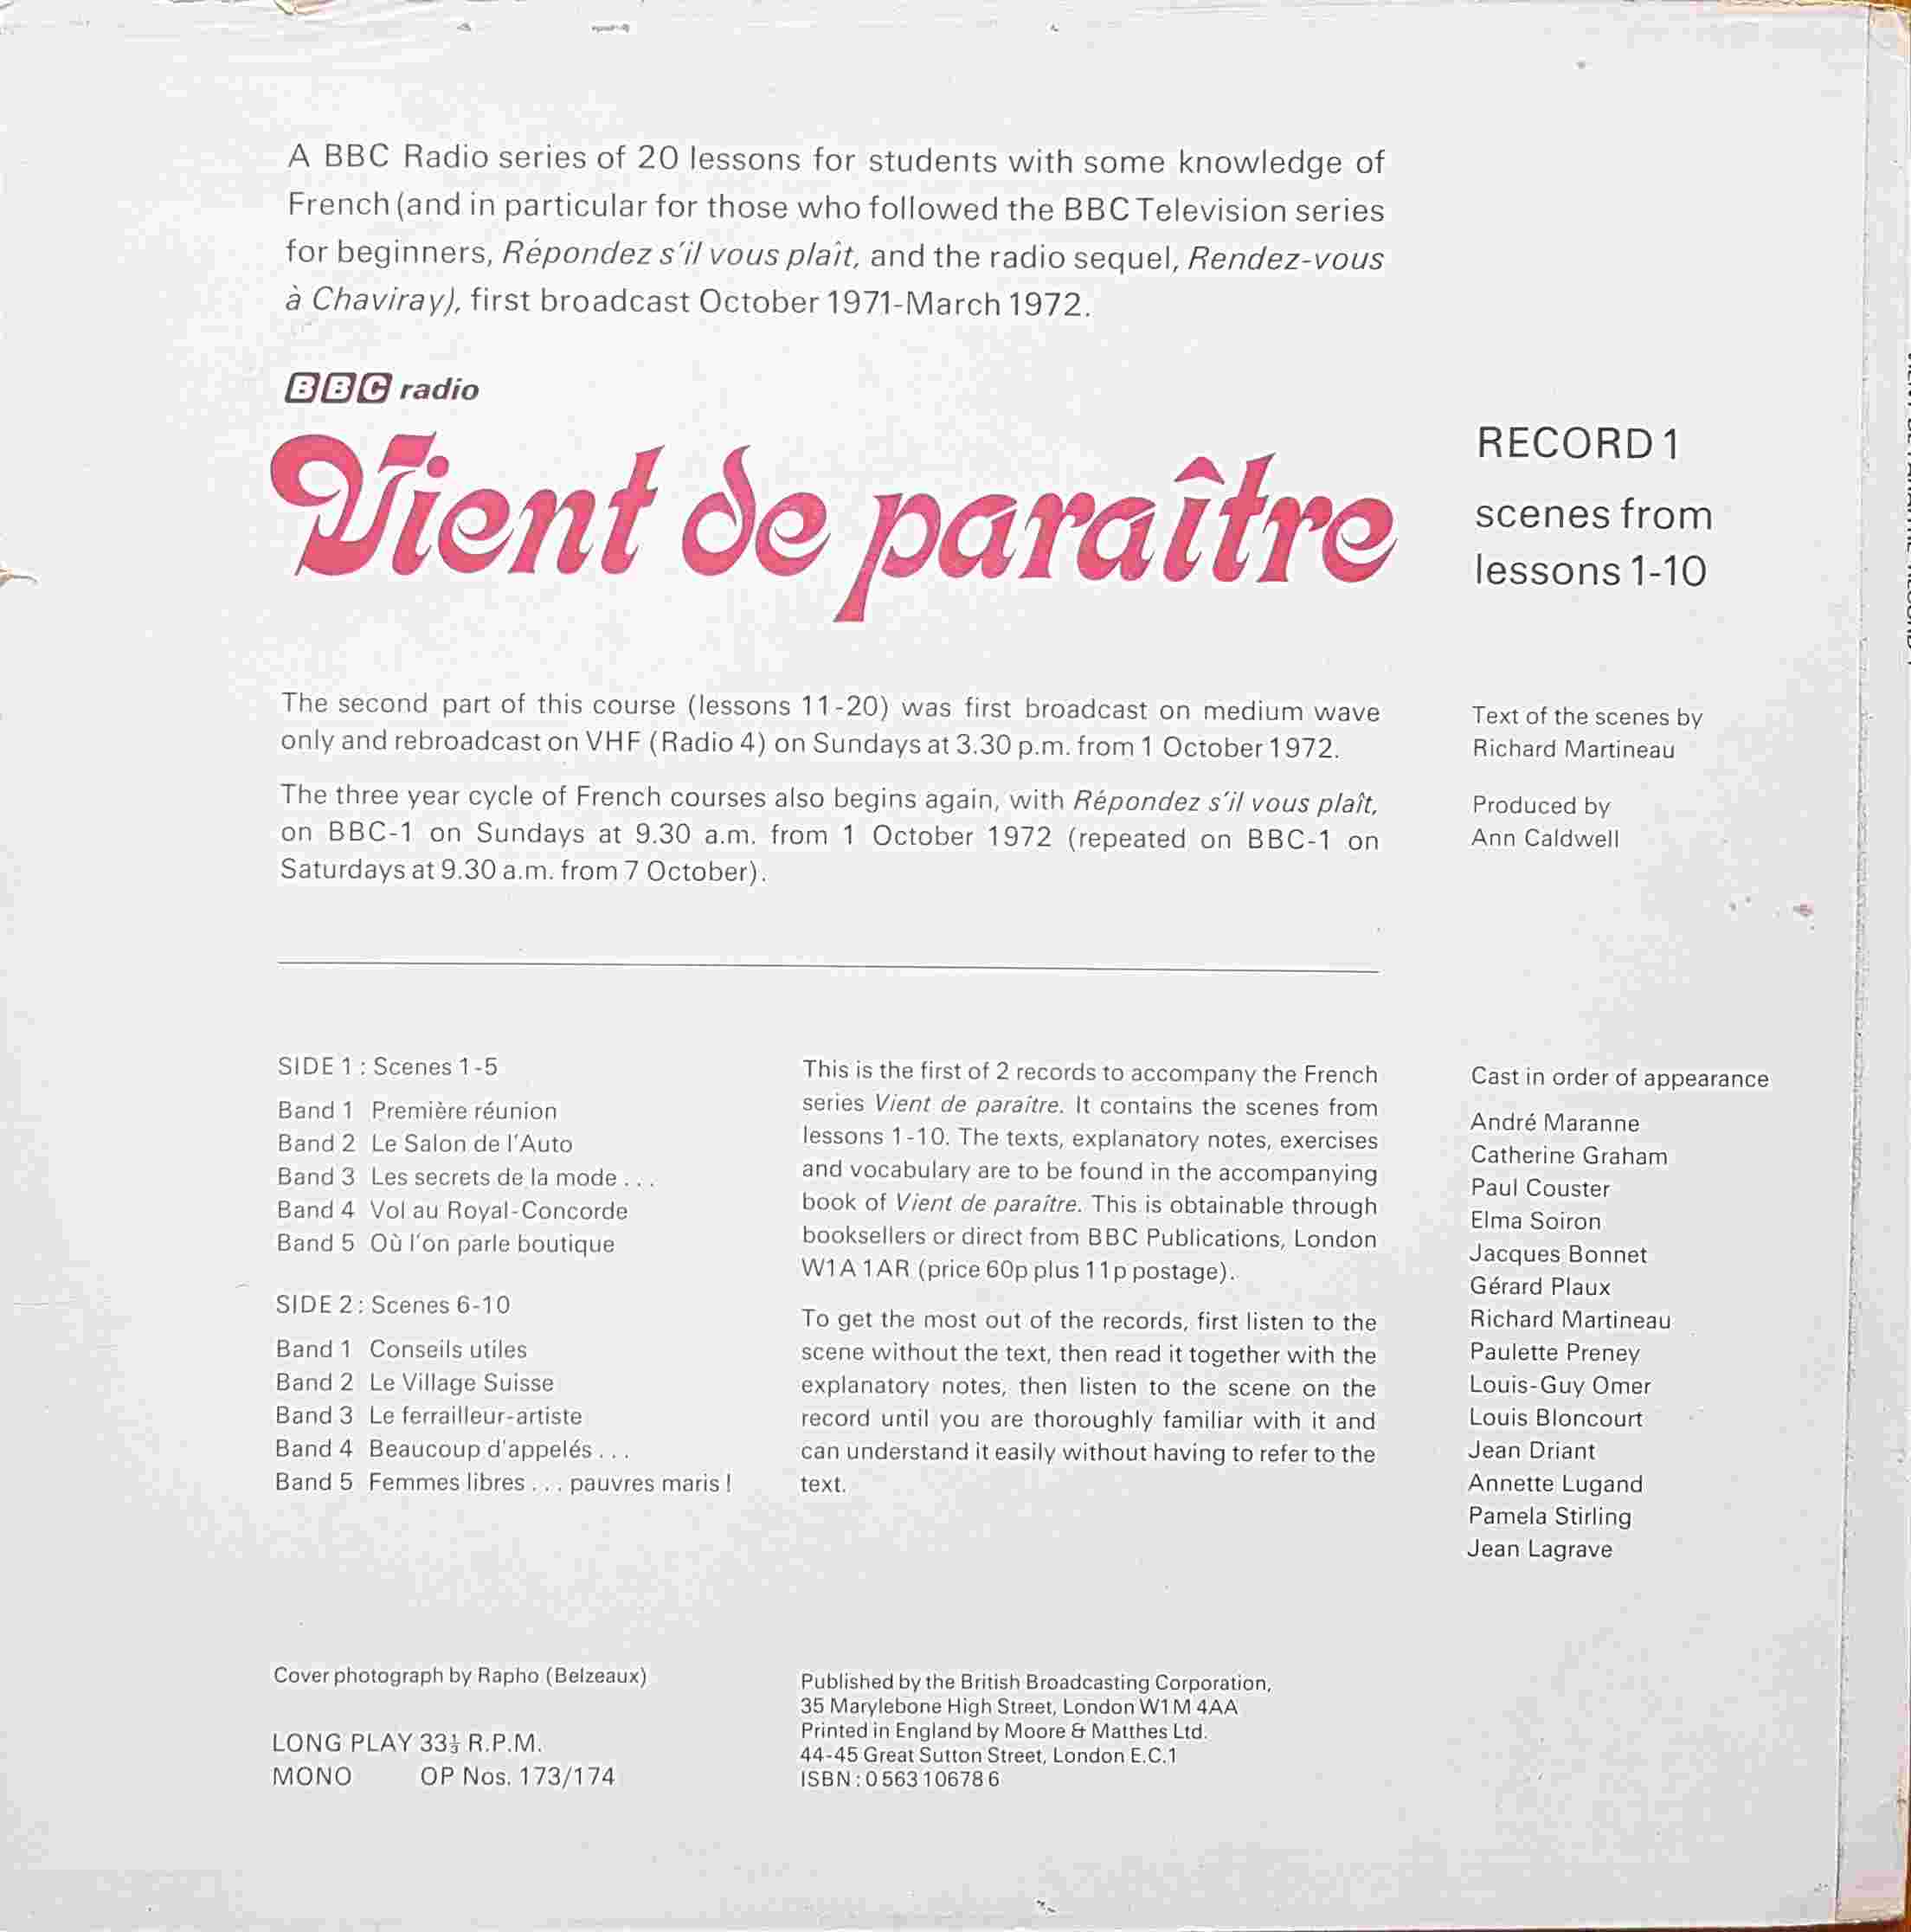 Picture of OP 173/174 Vient de paraitre - A BBC radio French series - Record 1 - Lessons 1 - 10 by artist Richard Martineau from the BBC records and Tapes library